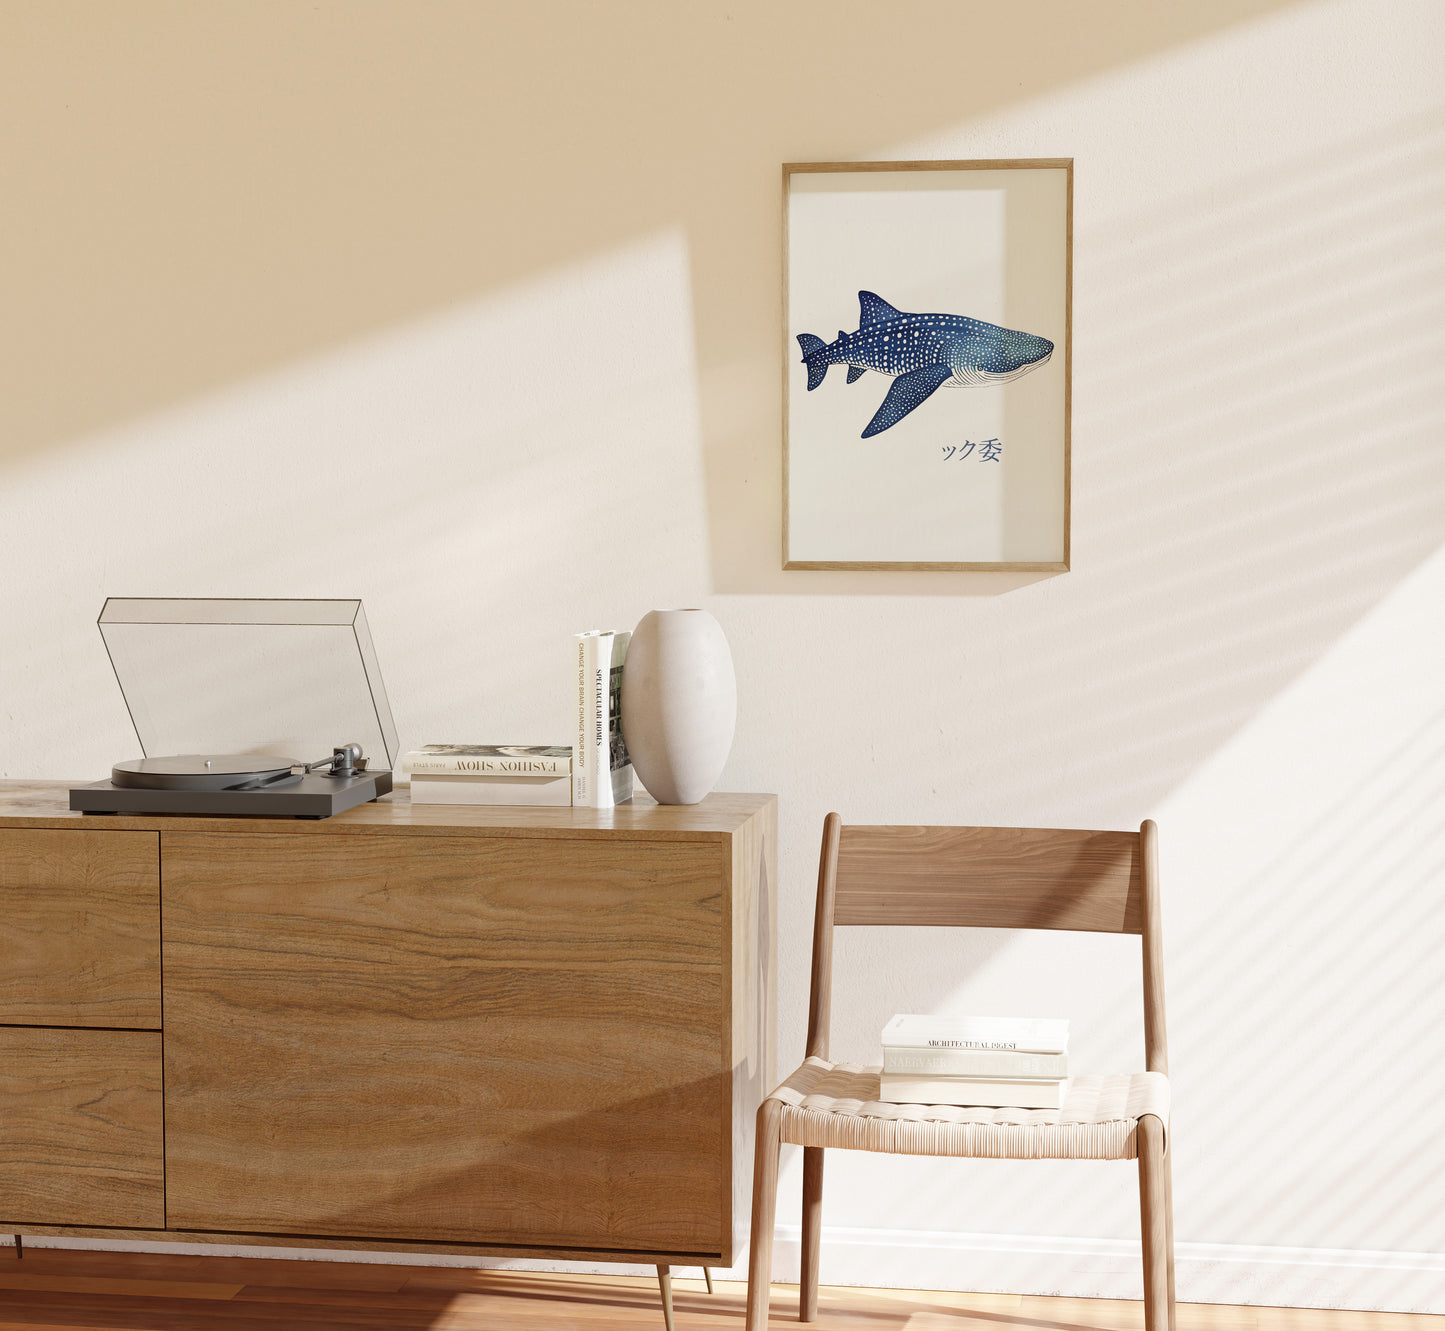 A cozy corner with a wooden cabinet, a record player, and a framed fish artwork on the wall.